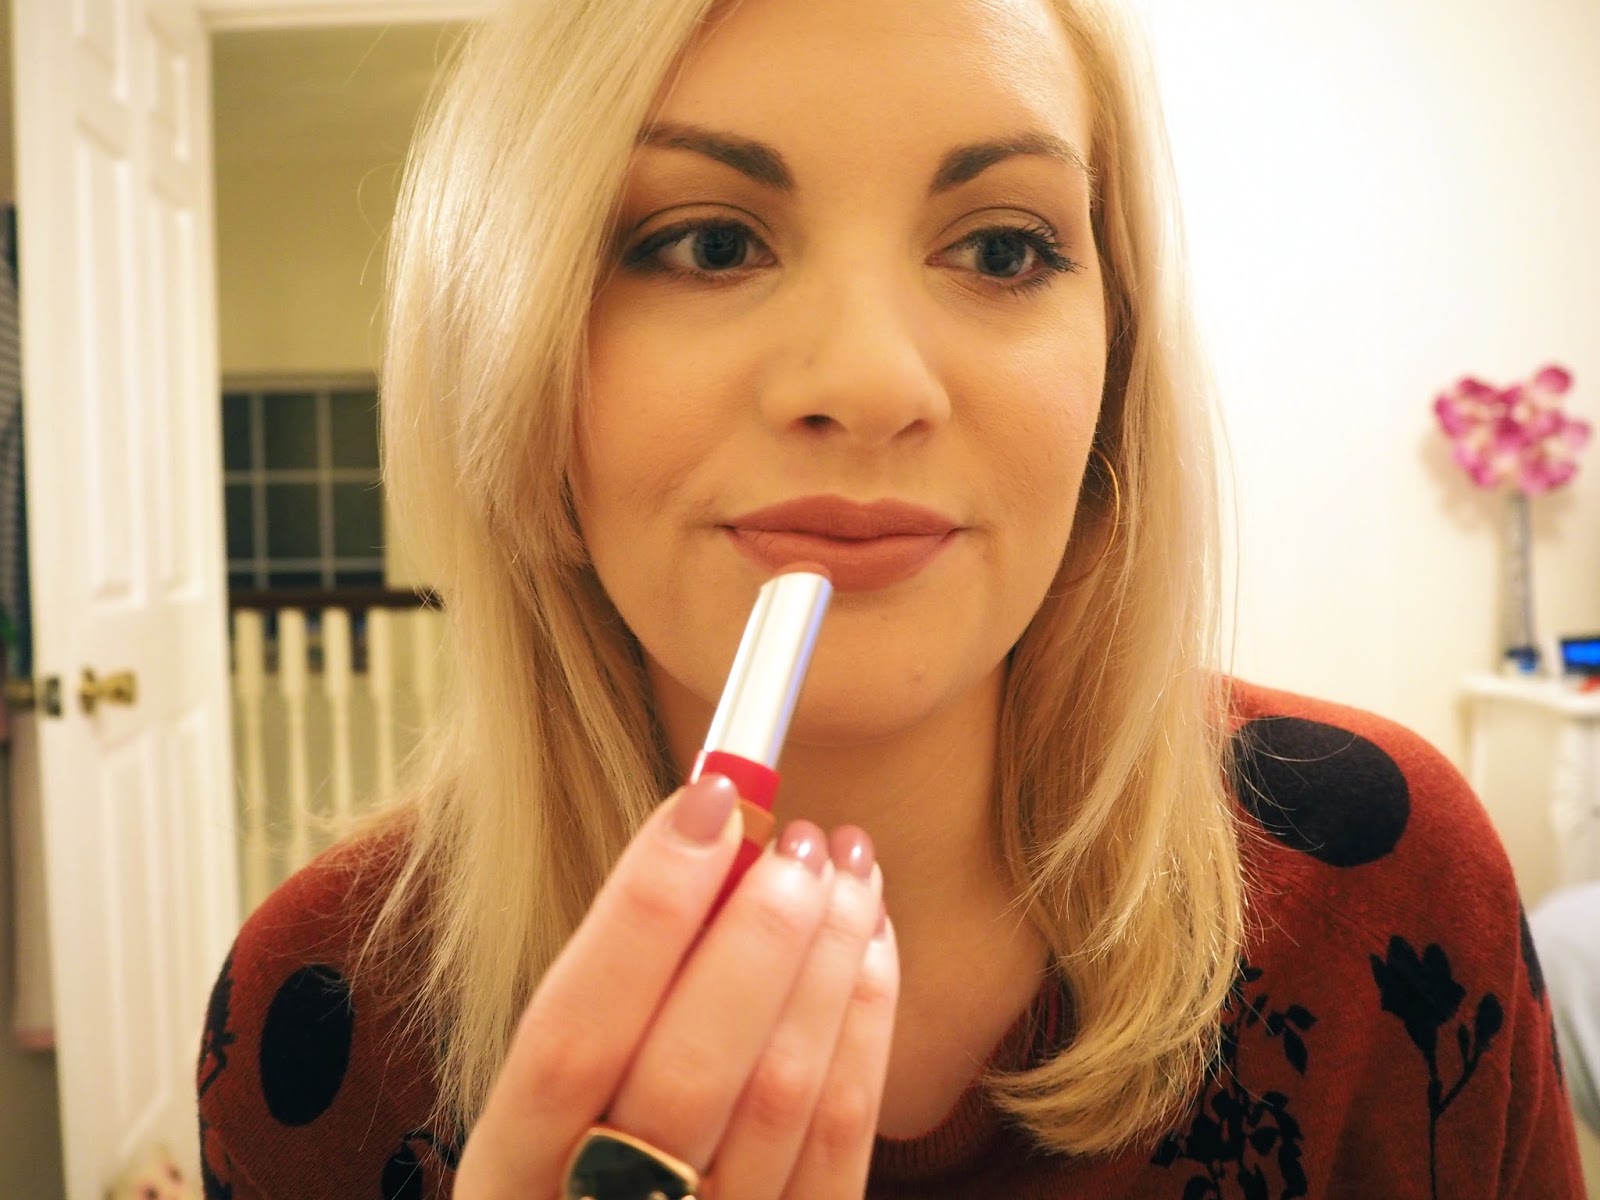 Rimmel London The Only 1 Matte Lipstick Collection, Katie Kirk Loves, Lipstick Swatches, Make Up Swatches, Beauty Blogger, Rimmel London, Matte Lipsticks, Make Up Review, Lipstick Collection, UK Blogger